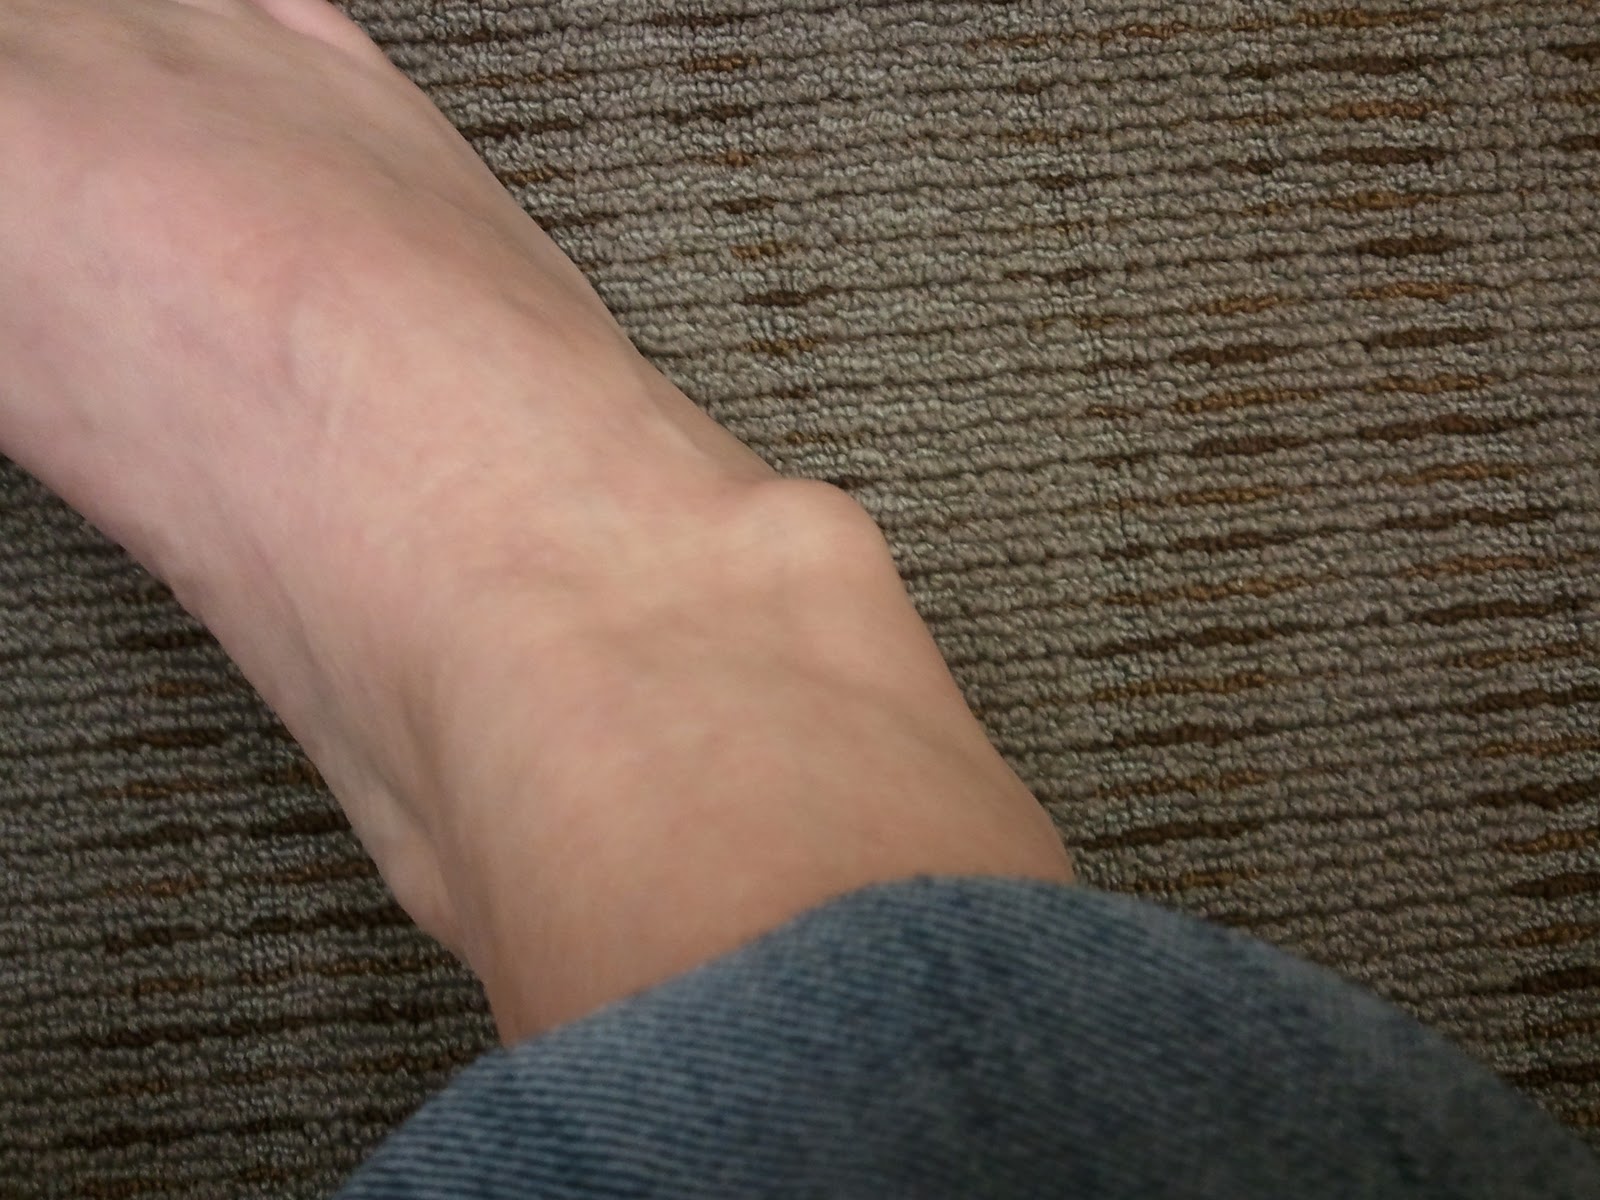 Why Do You Have Lump on Your Ankle? | MD-Health.com